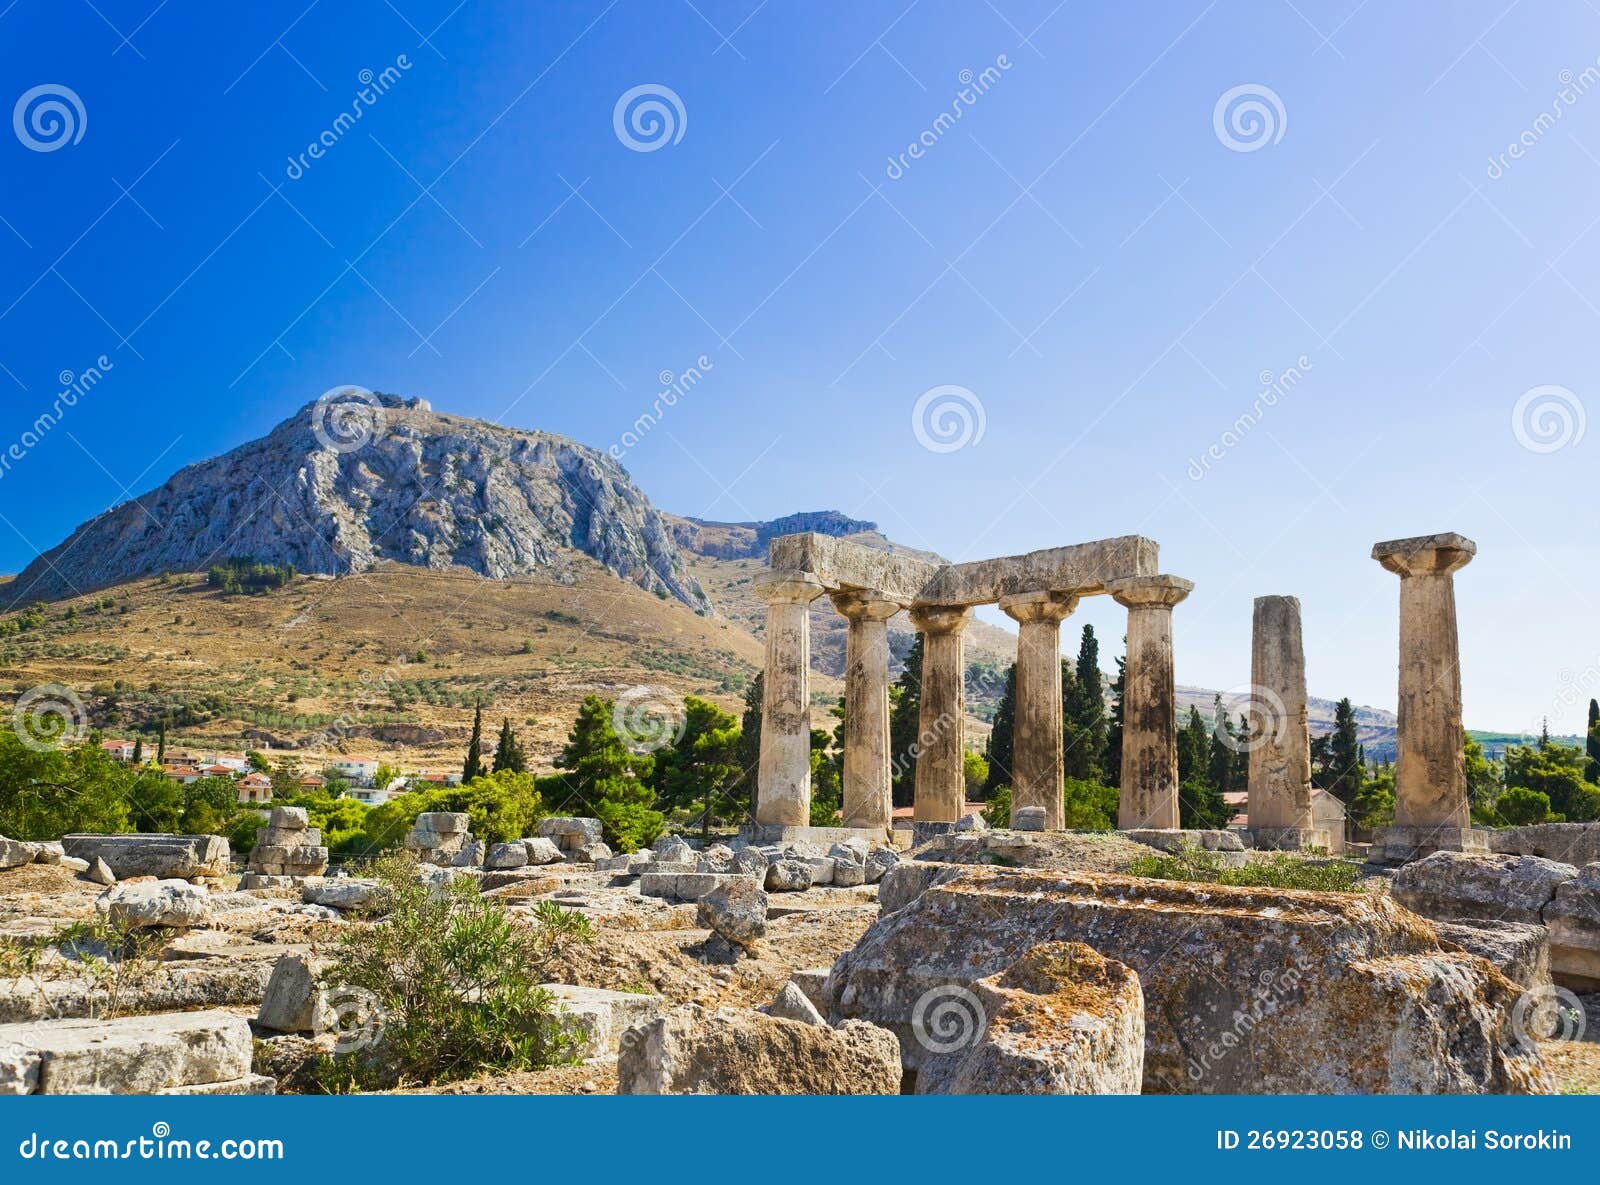 ruins of temple in corinth, greece